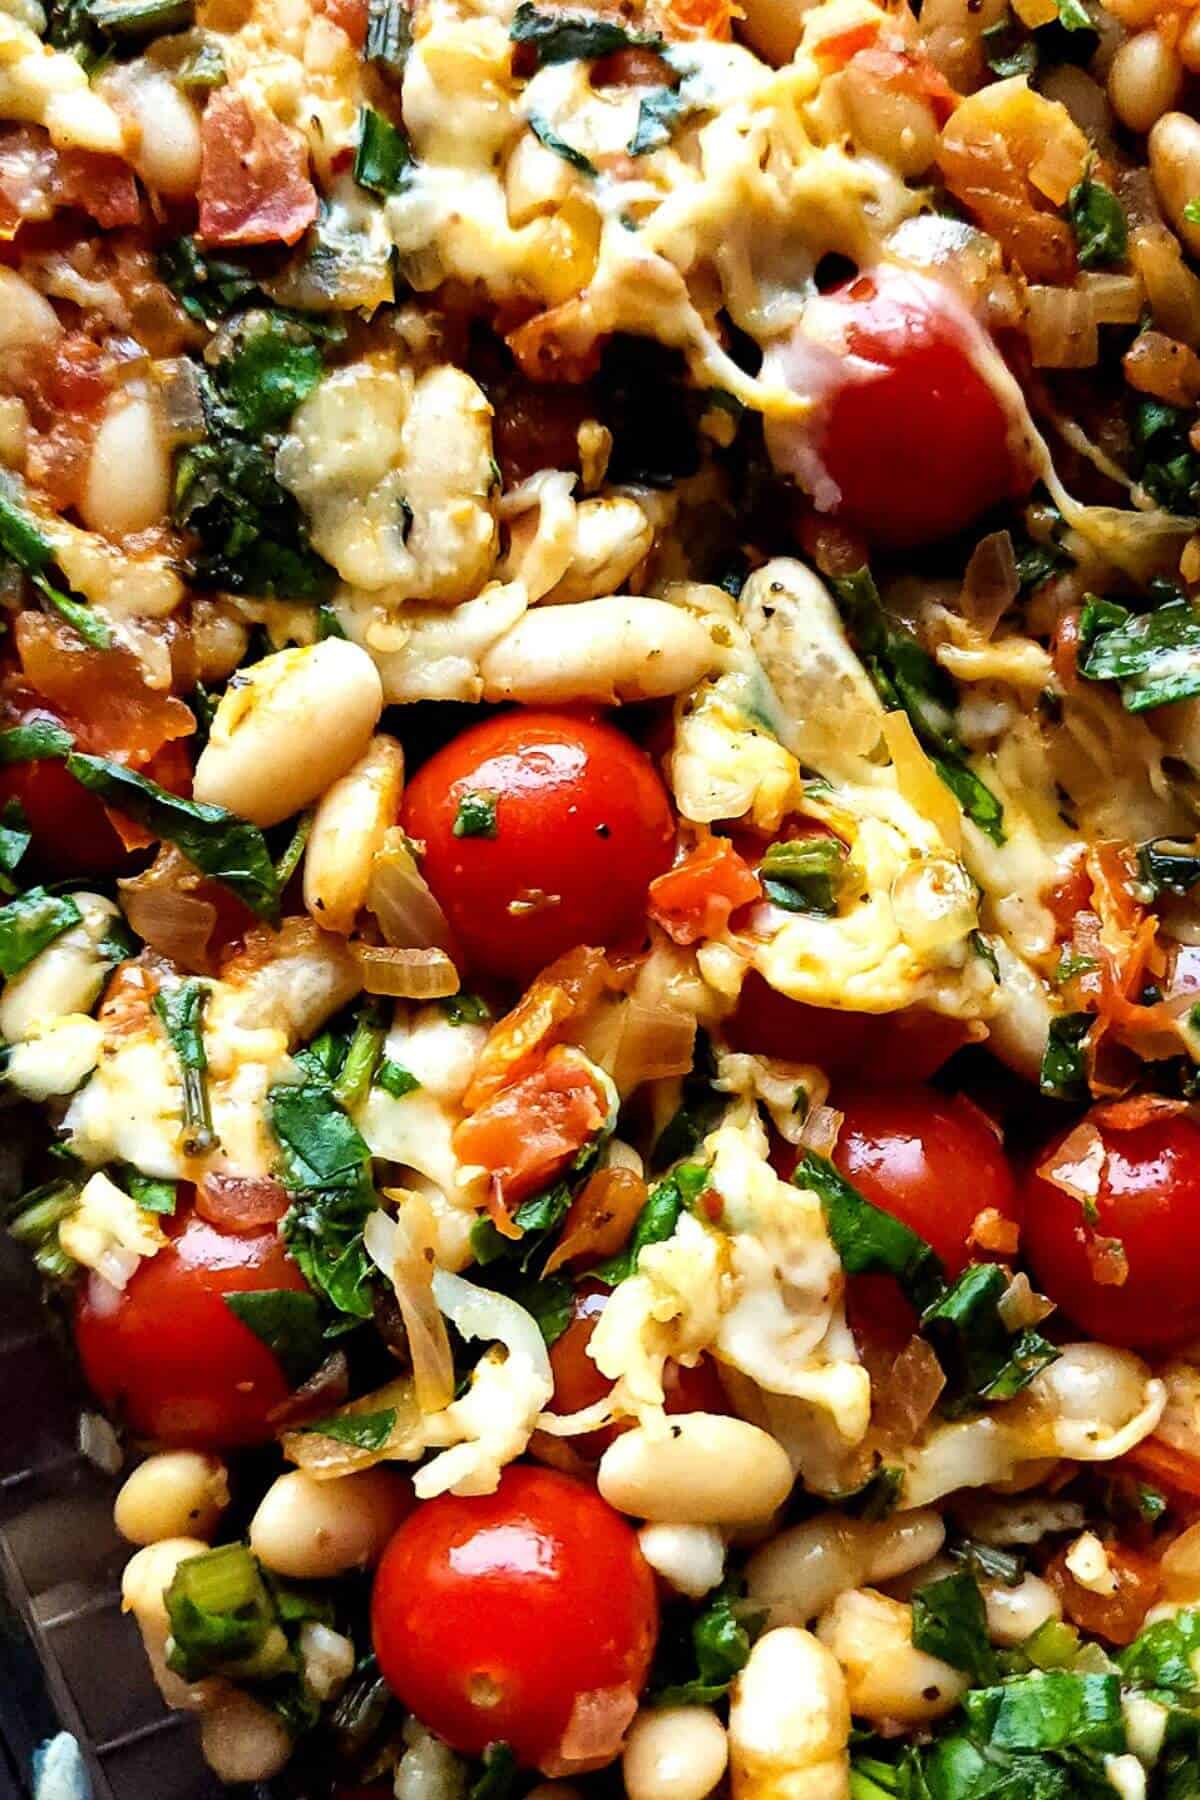 Baked white beans with spinach and cherry tomatoes.